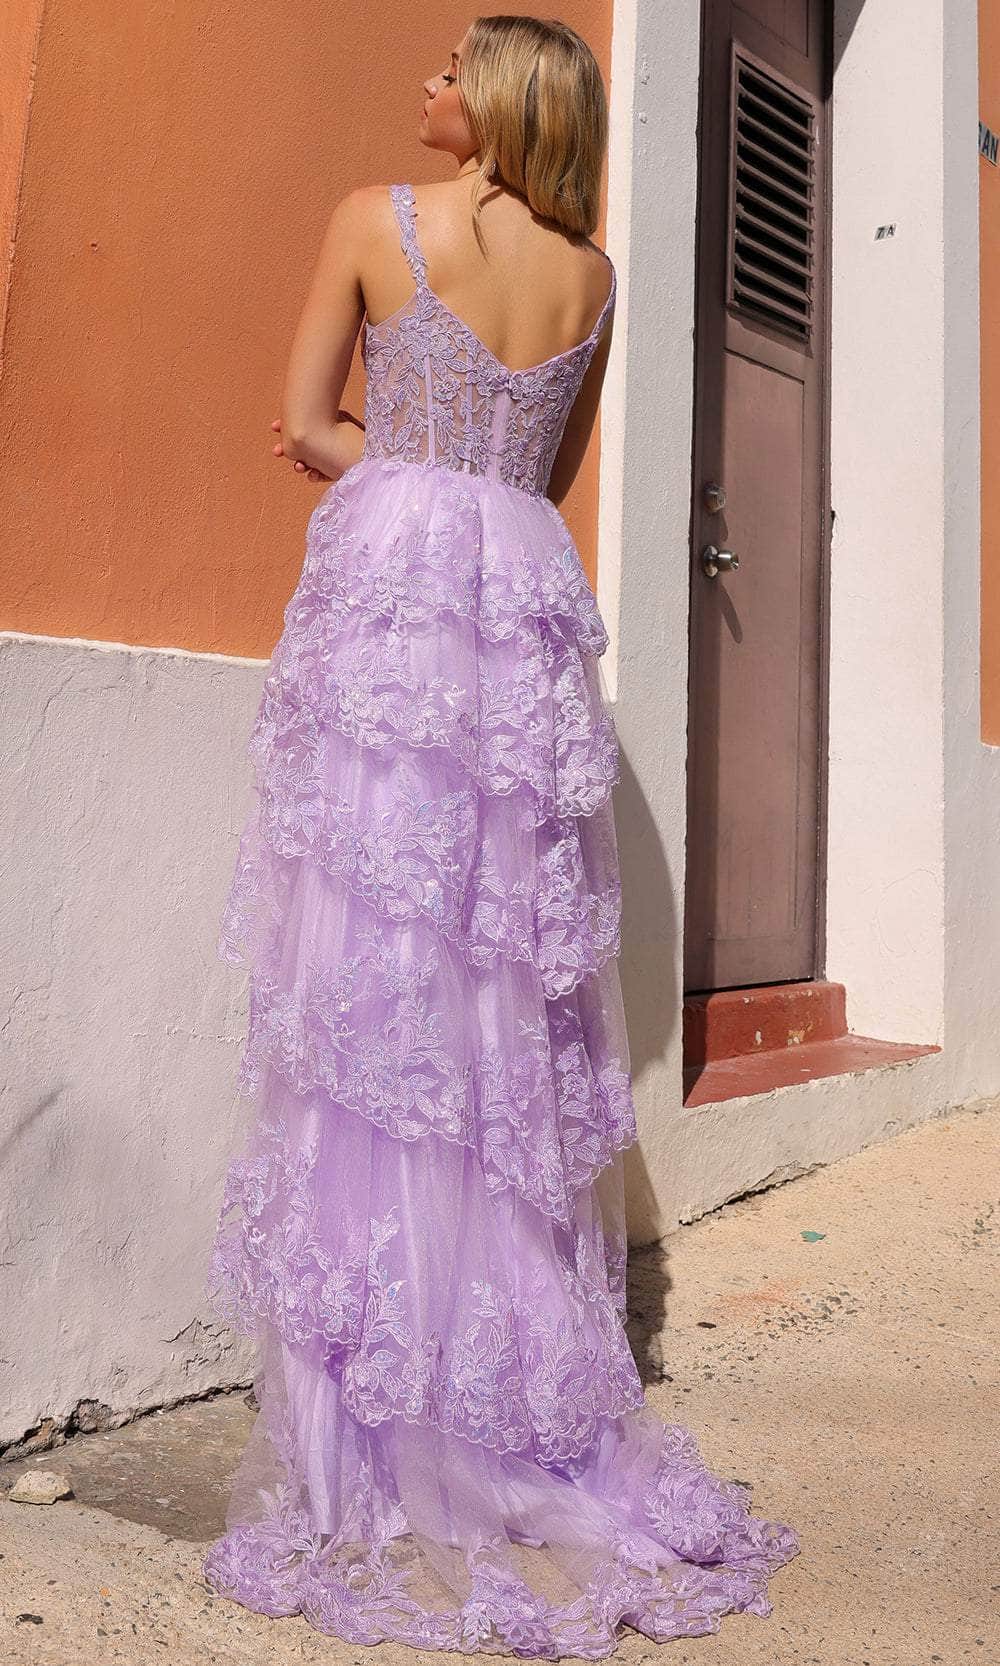 Nox Anabel T1335 - Lace Ornate Prom Dress Special Occasion Dresses 